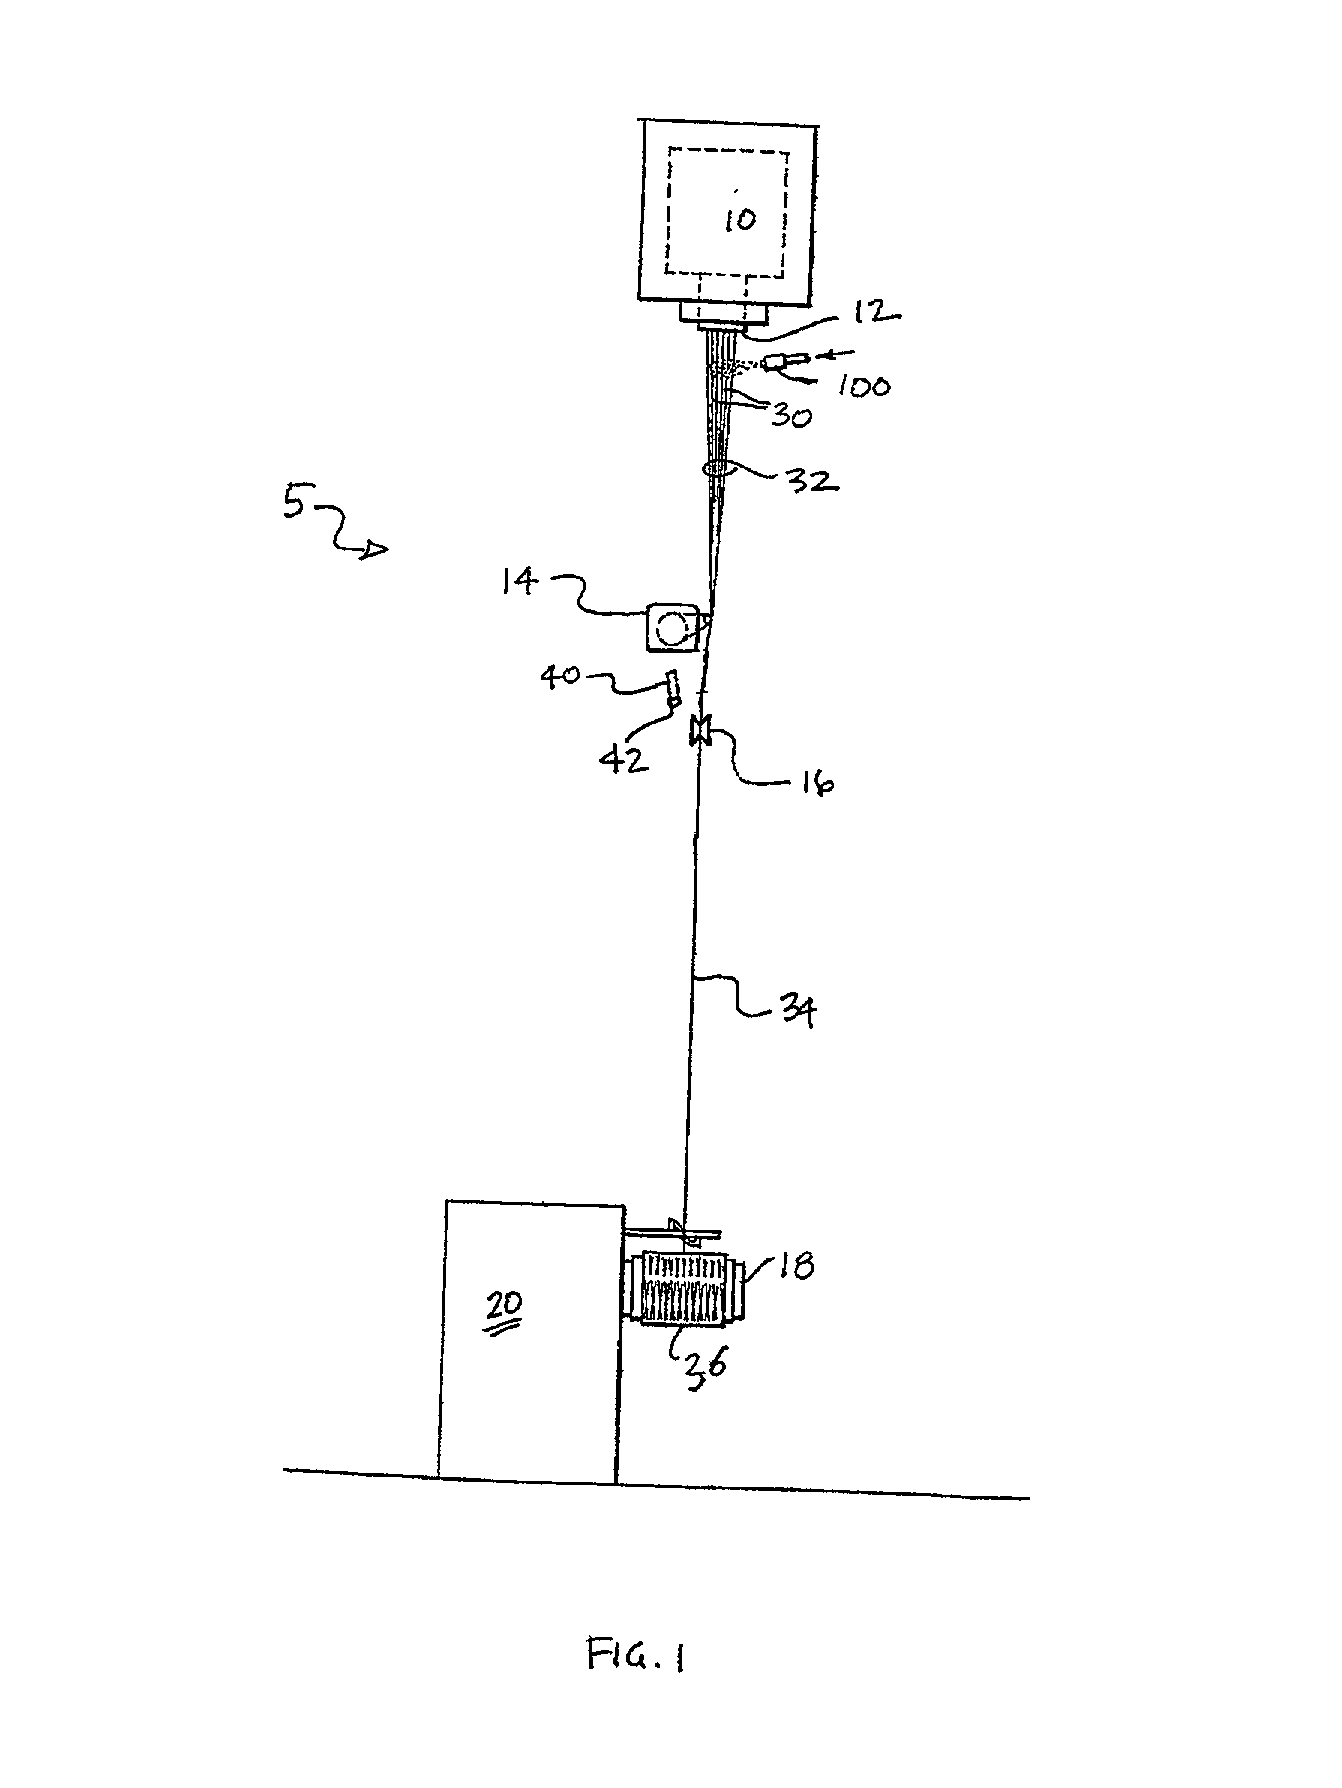 Methods and apparatus for the cooling of filaments in a filament forming process